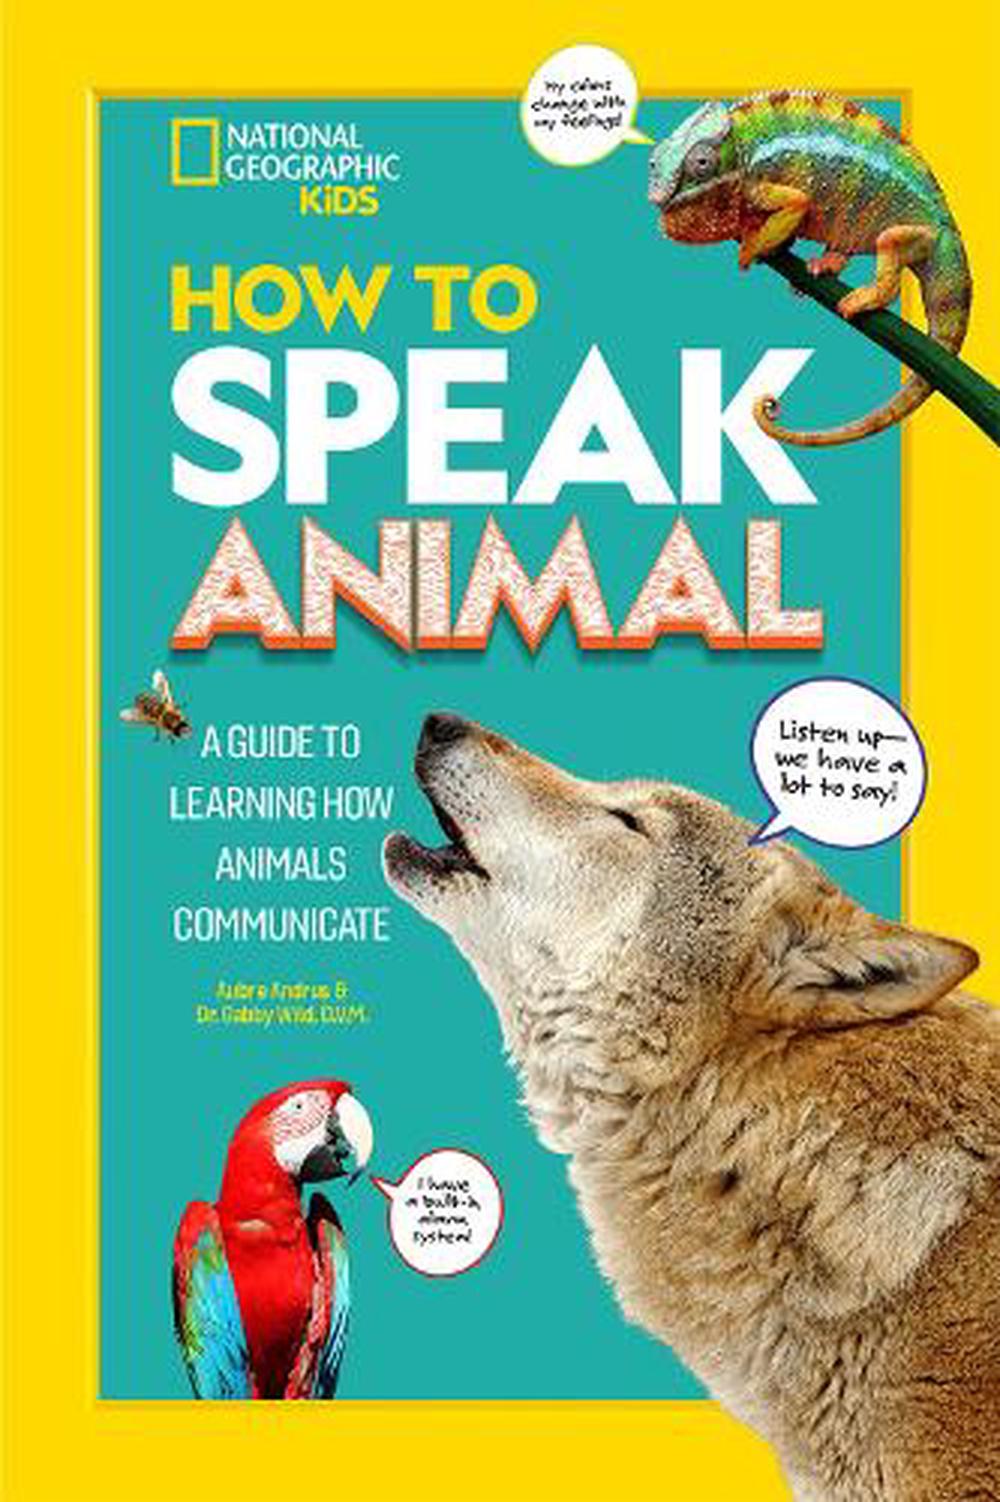 How to Speak Animal: A Guide to Learning How Animals Communicate by  National Geographic Kids, Paperback, 9781426372384 | Buy online at The Nile